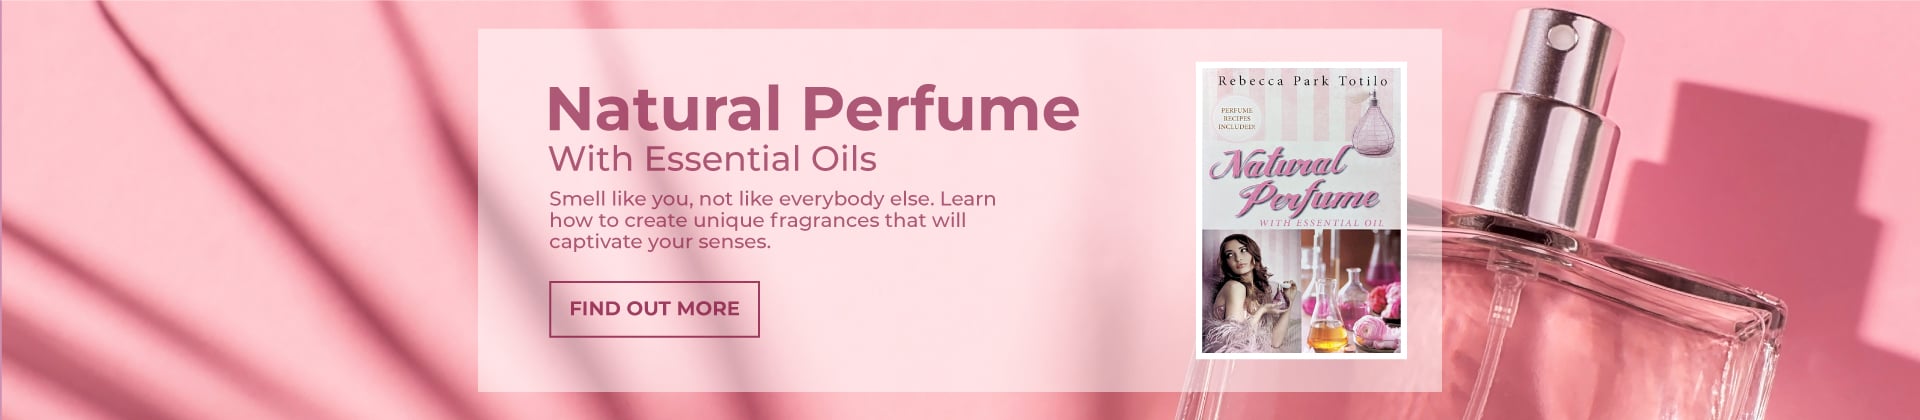 Natural Perfume with Essential Oil